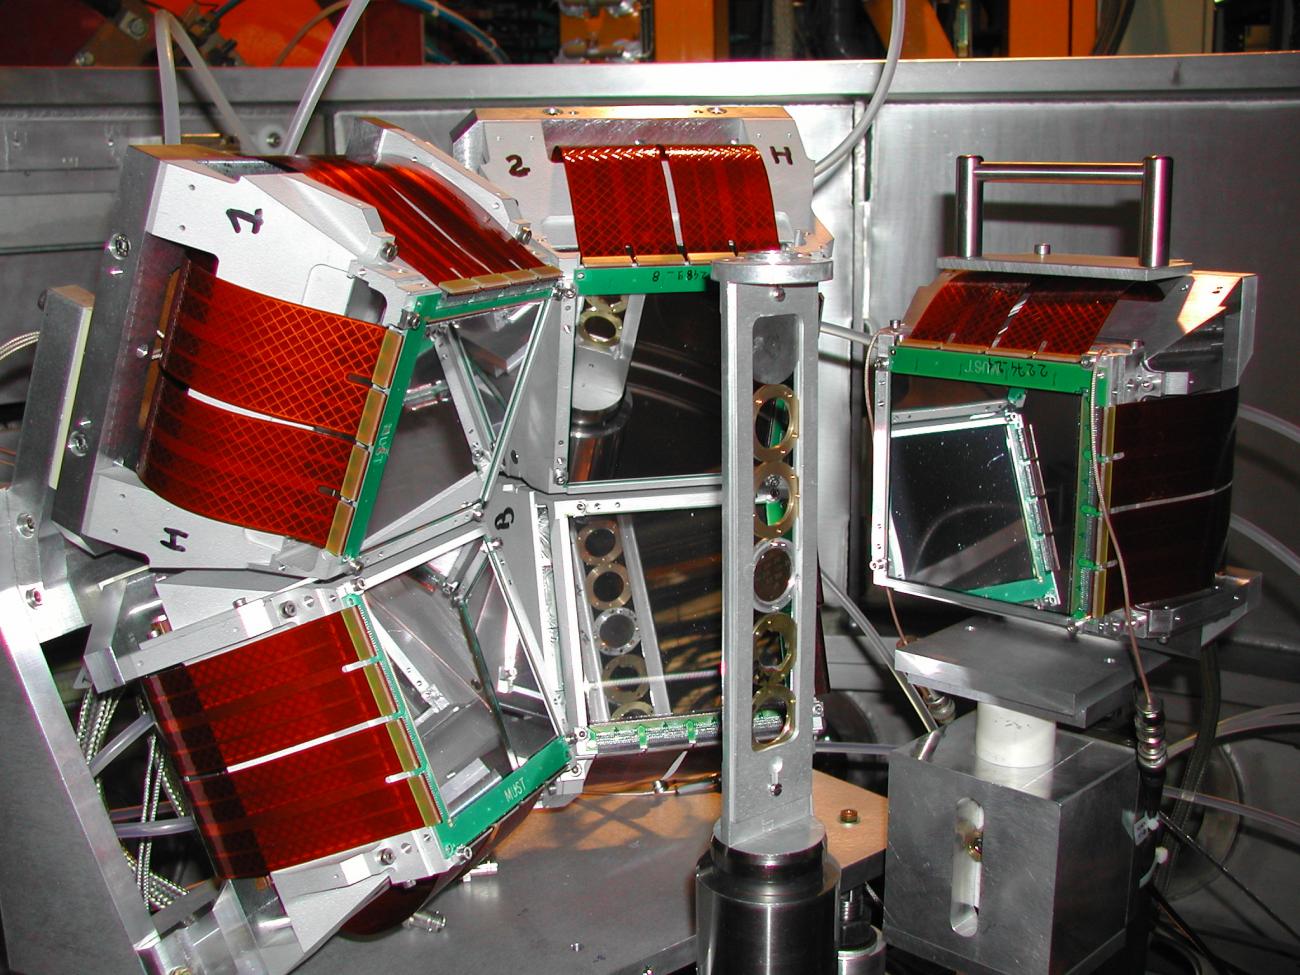  Configurations of MUST2 telescopes for the experiments of direct reactions at GANIL